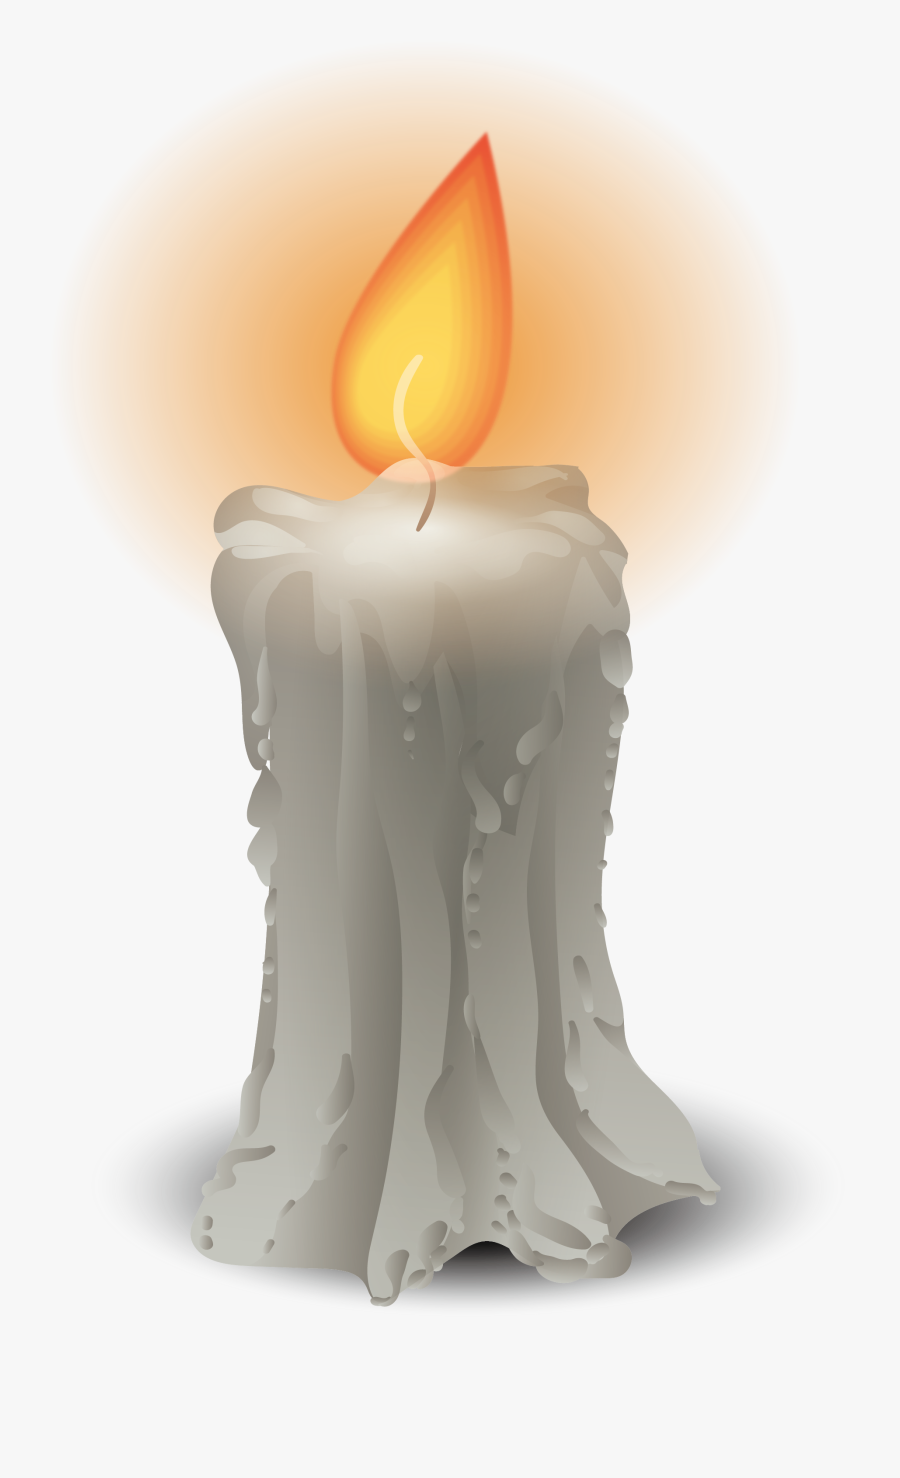 Candle Combustion Wax - Candles Png, Transparent Clipart